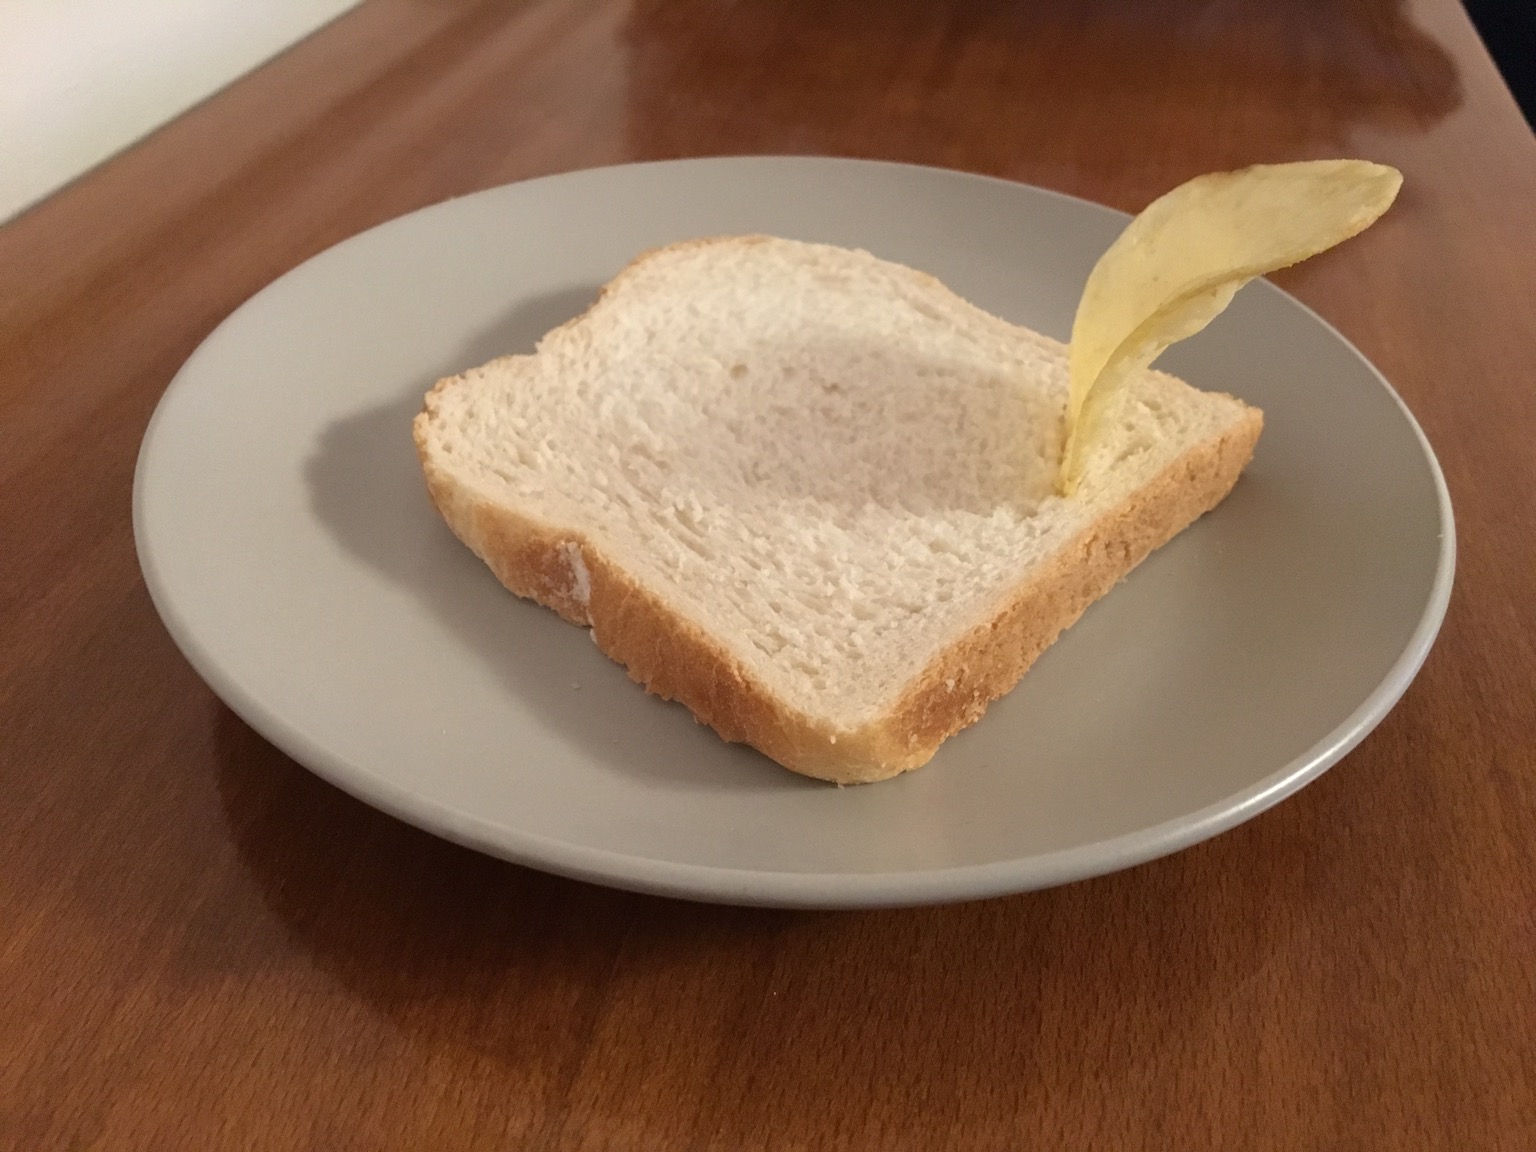 White sliced bread with a single crisp protruding